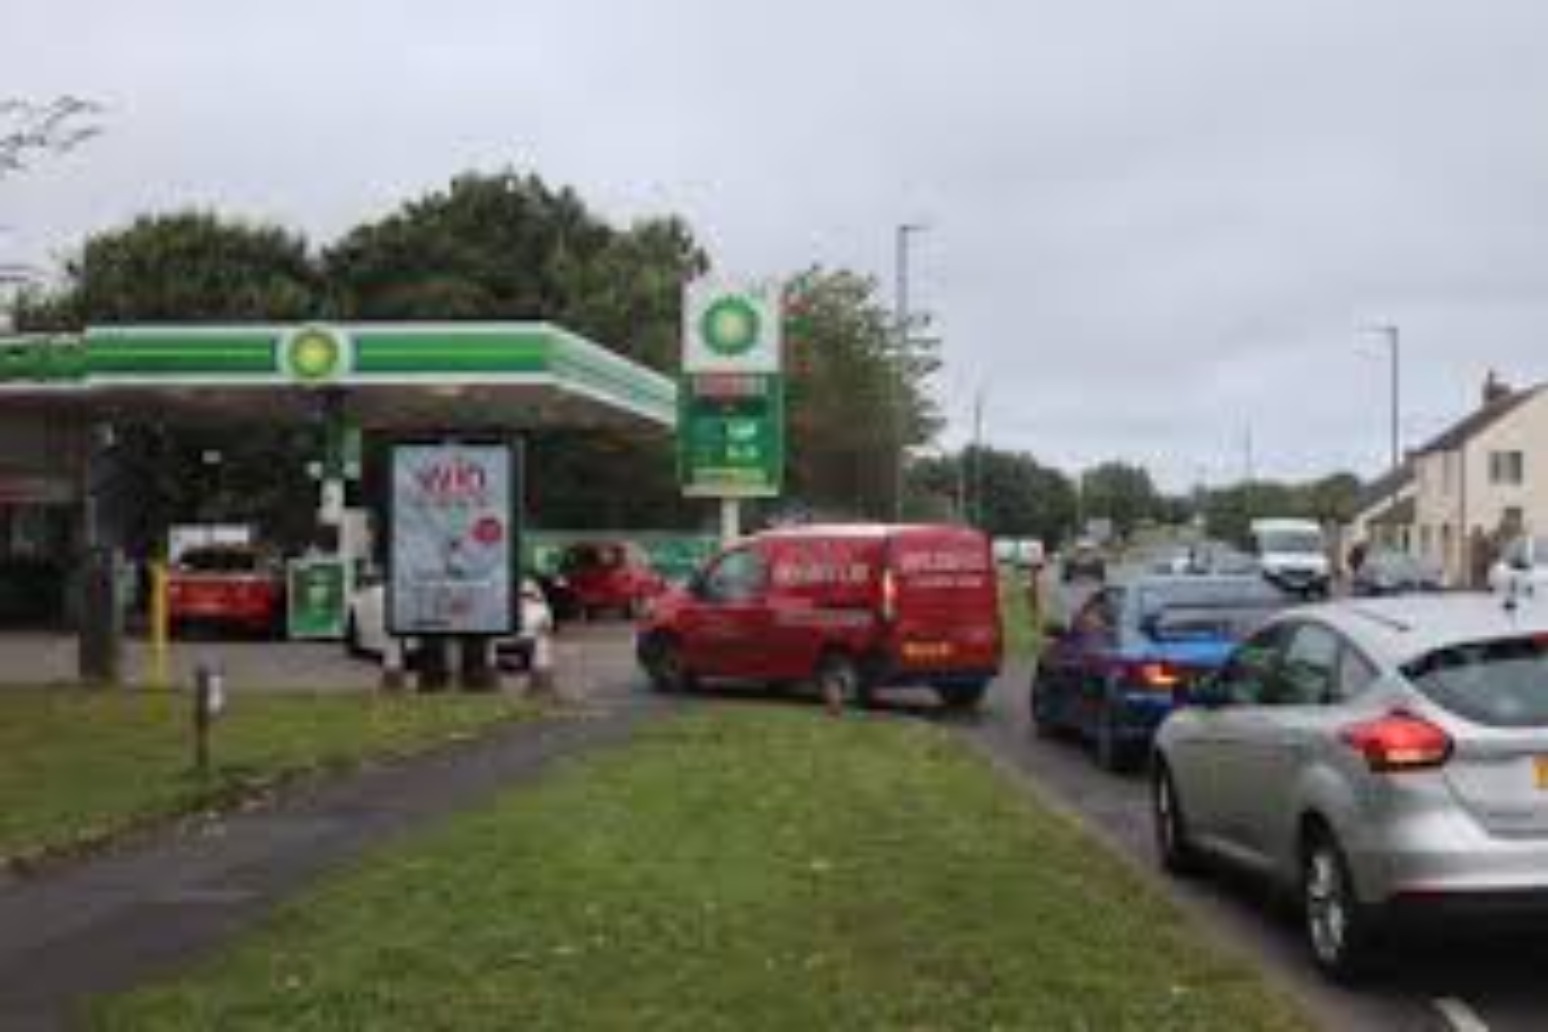 Petrol panic buying causing ‘really serious problems’ as pumps run dry. 